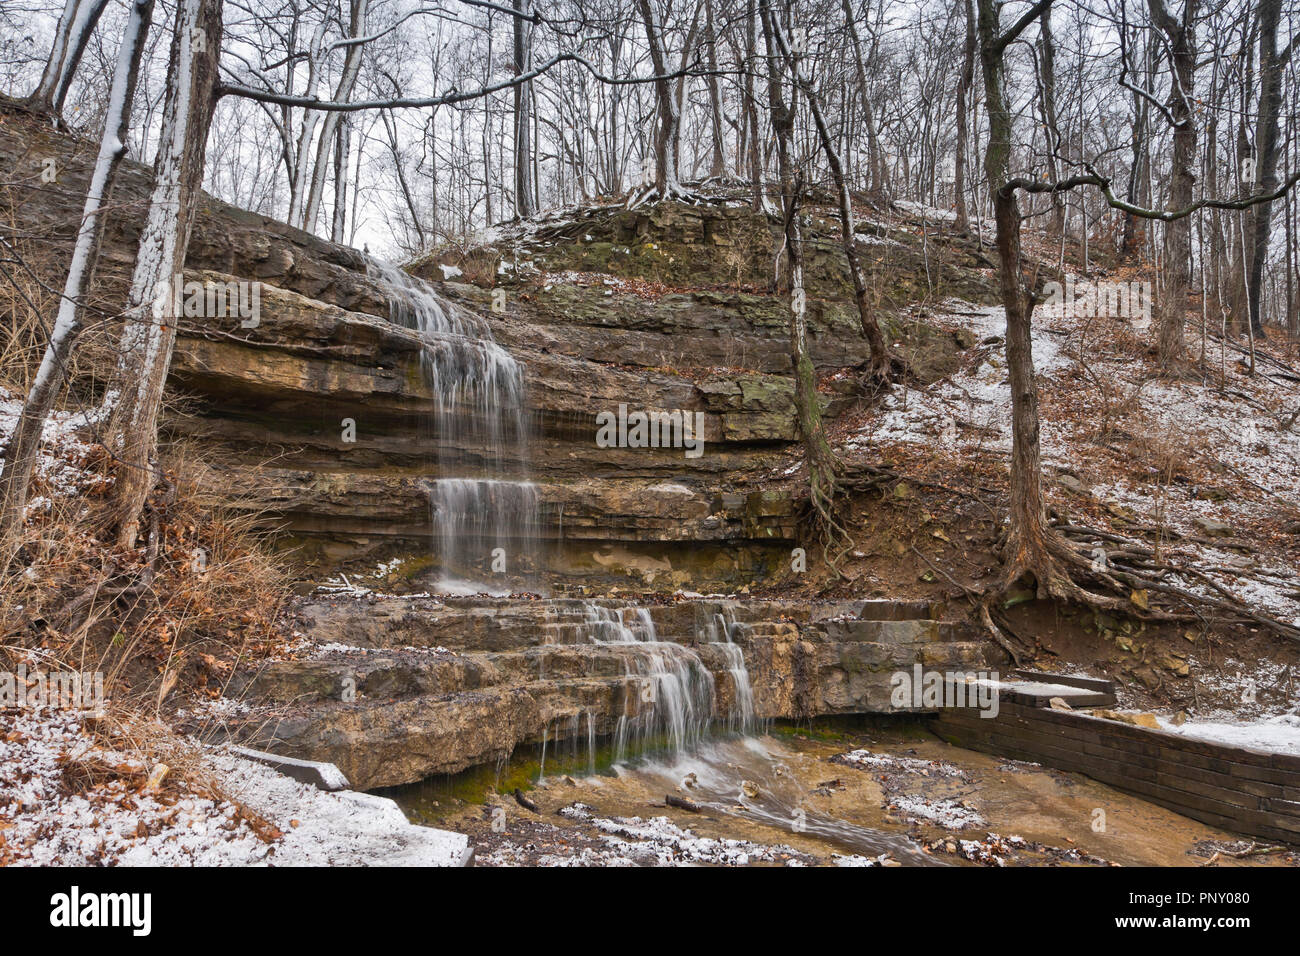 Snowmelt causes a waterfall to pour over the Dripping Springs cascade at (St. Louis) Creve Coeur Park as March comes in like a lion with snow. Stock Photo